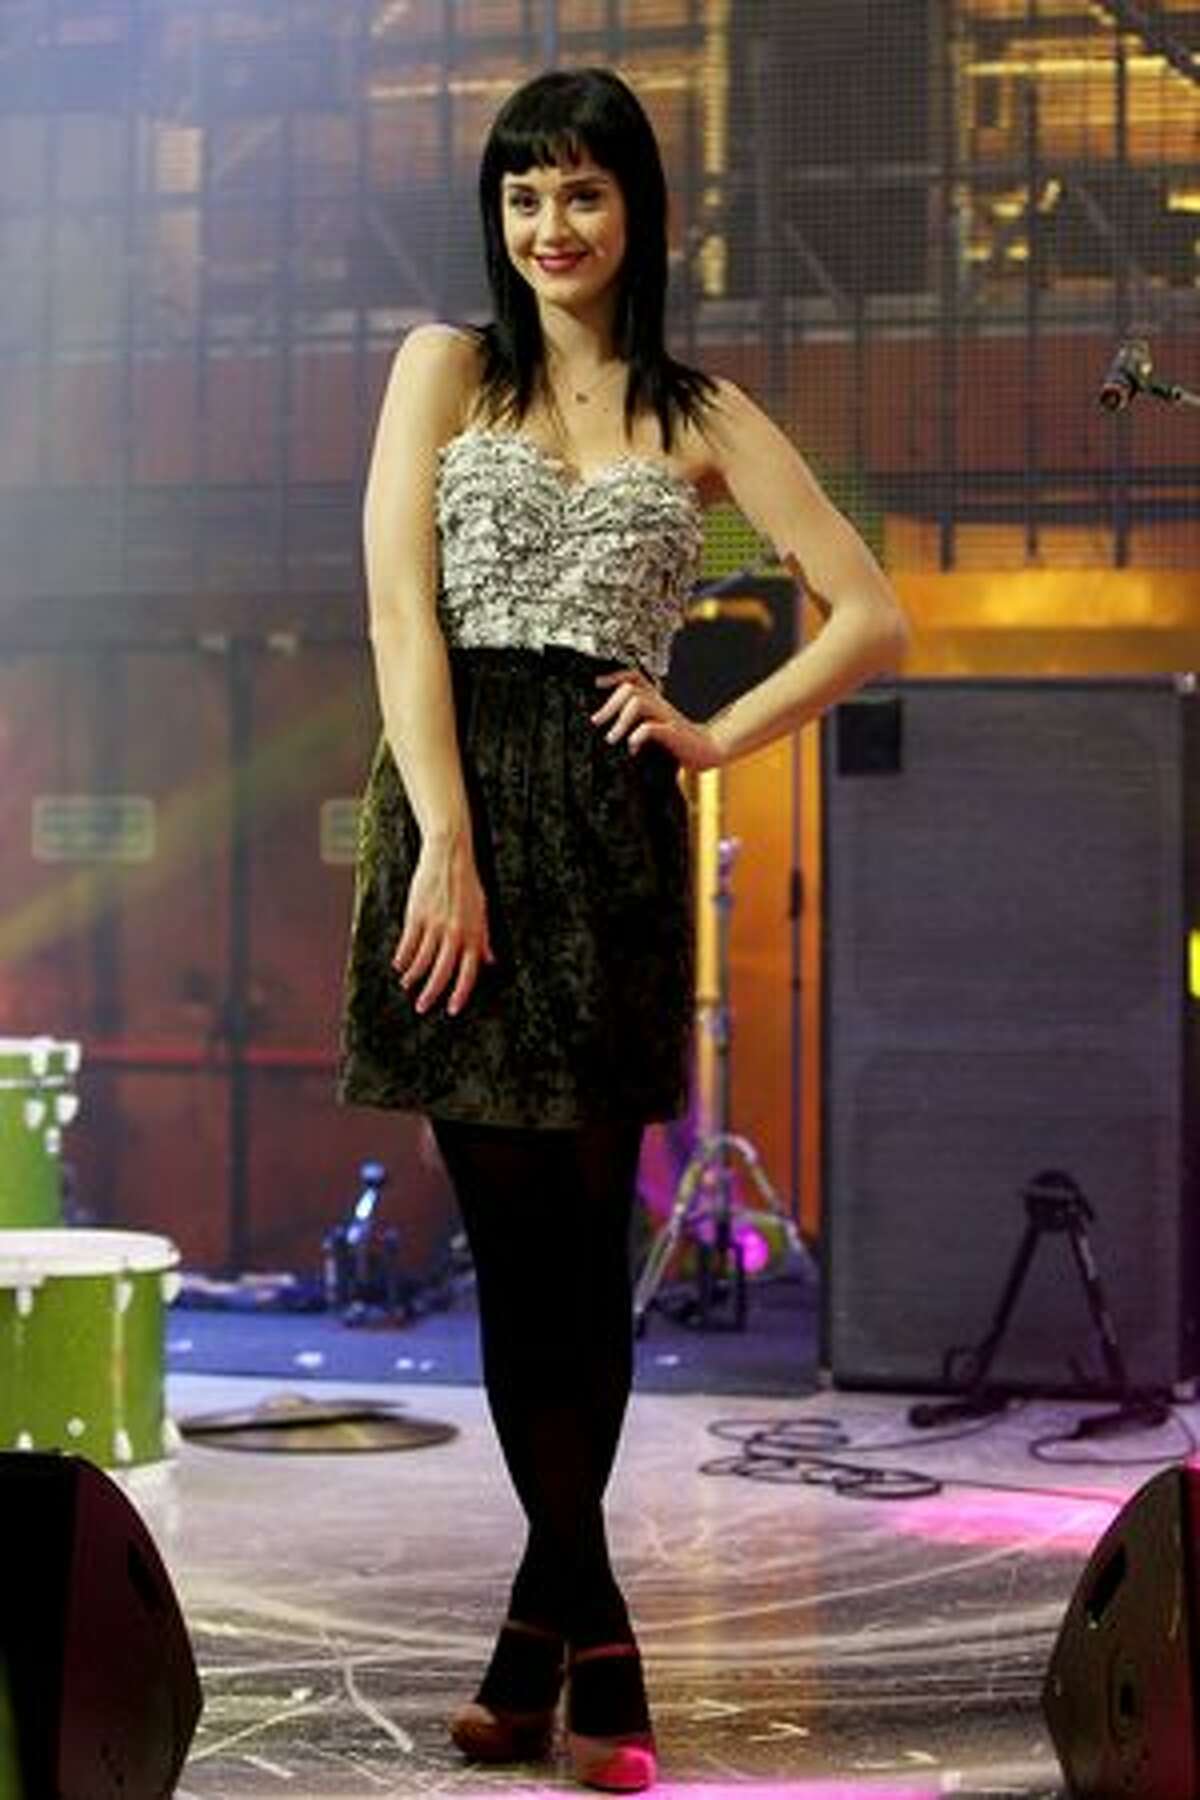 Katy Perry performs at the "Scalo 76" Italian TV show on Nov. 18, 2008 in Milan, Italy.